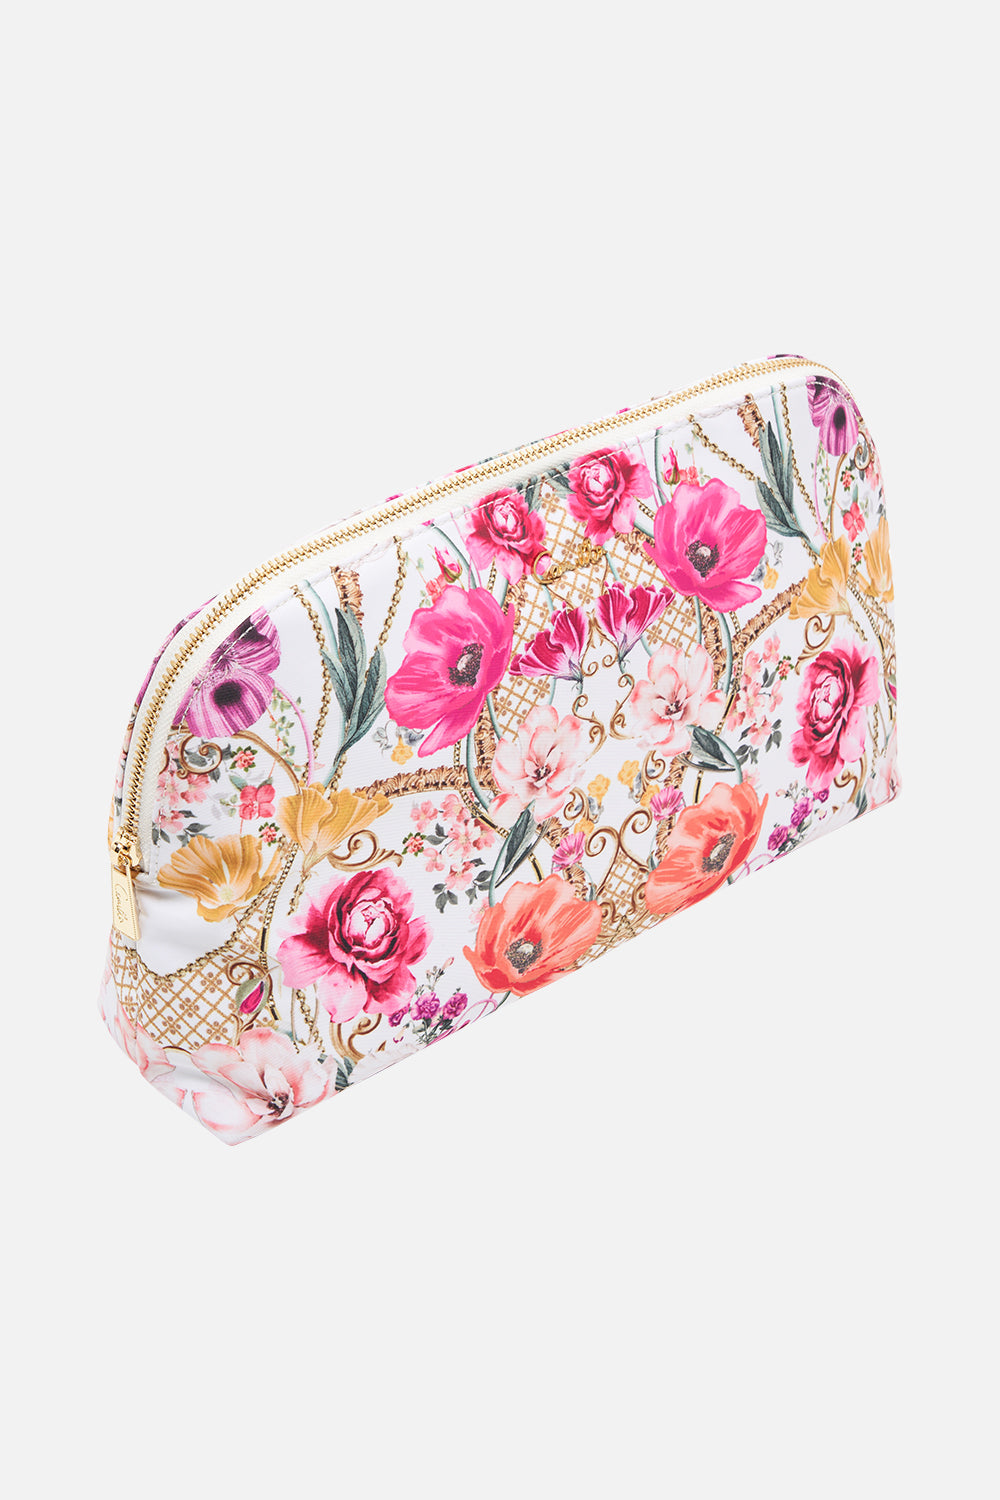 CAMILLA Large Cosmetic Case - Destiny Calling - Magpie Style